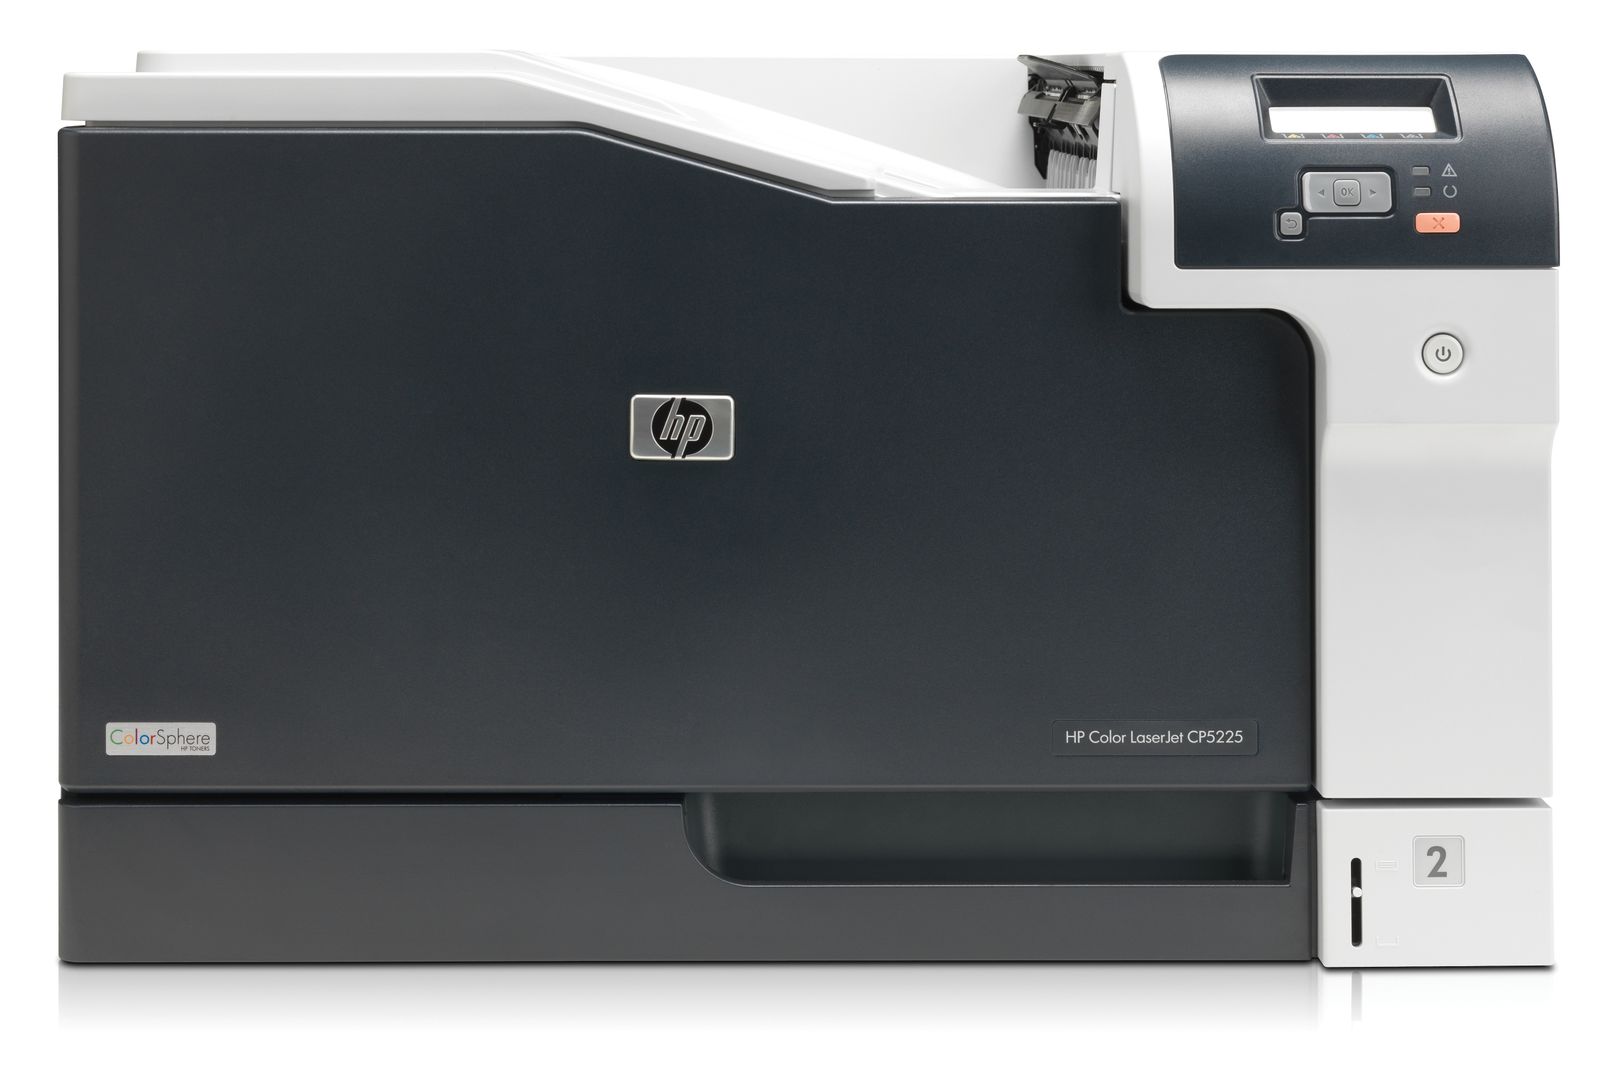 HP P Color LaserJet Professional CP5225dn 20ppm mono colour, A4, duplex, 600x600dpi, 192MB memory, 250 paper tray, 100 sheet purpose tray, hi-speed USB 2.0, built-in fast ethernet | Synigo